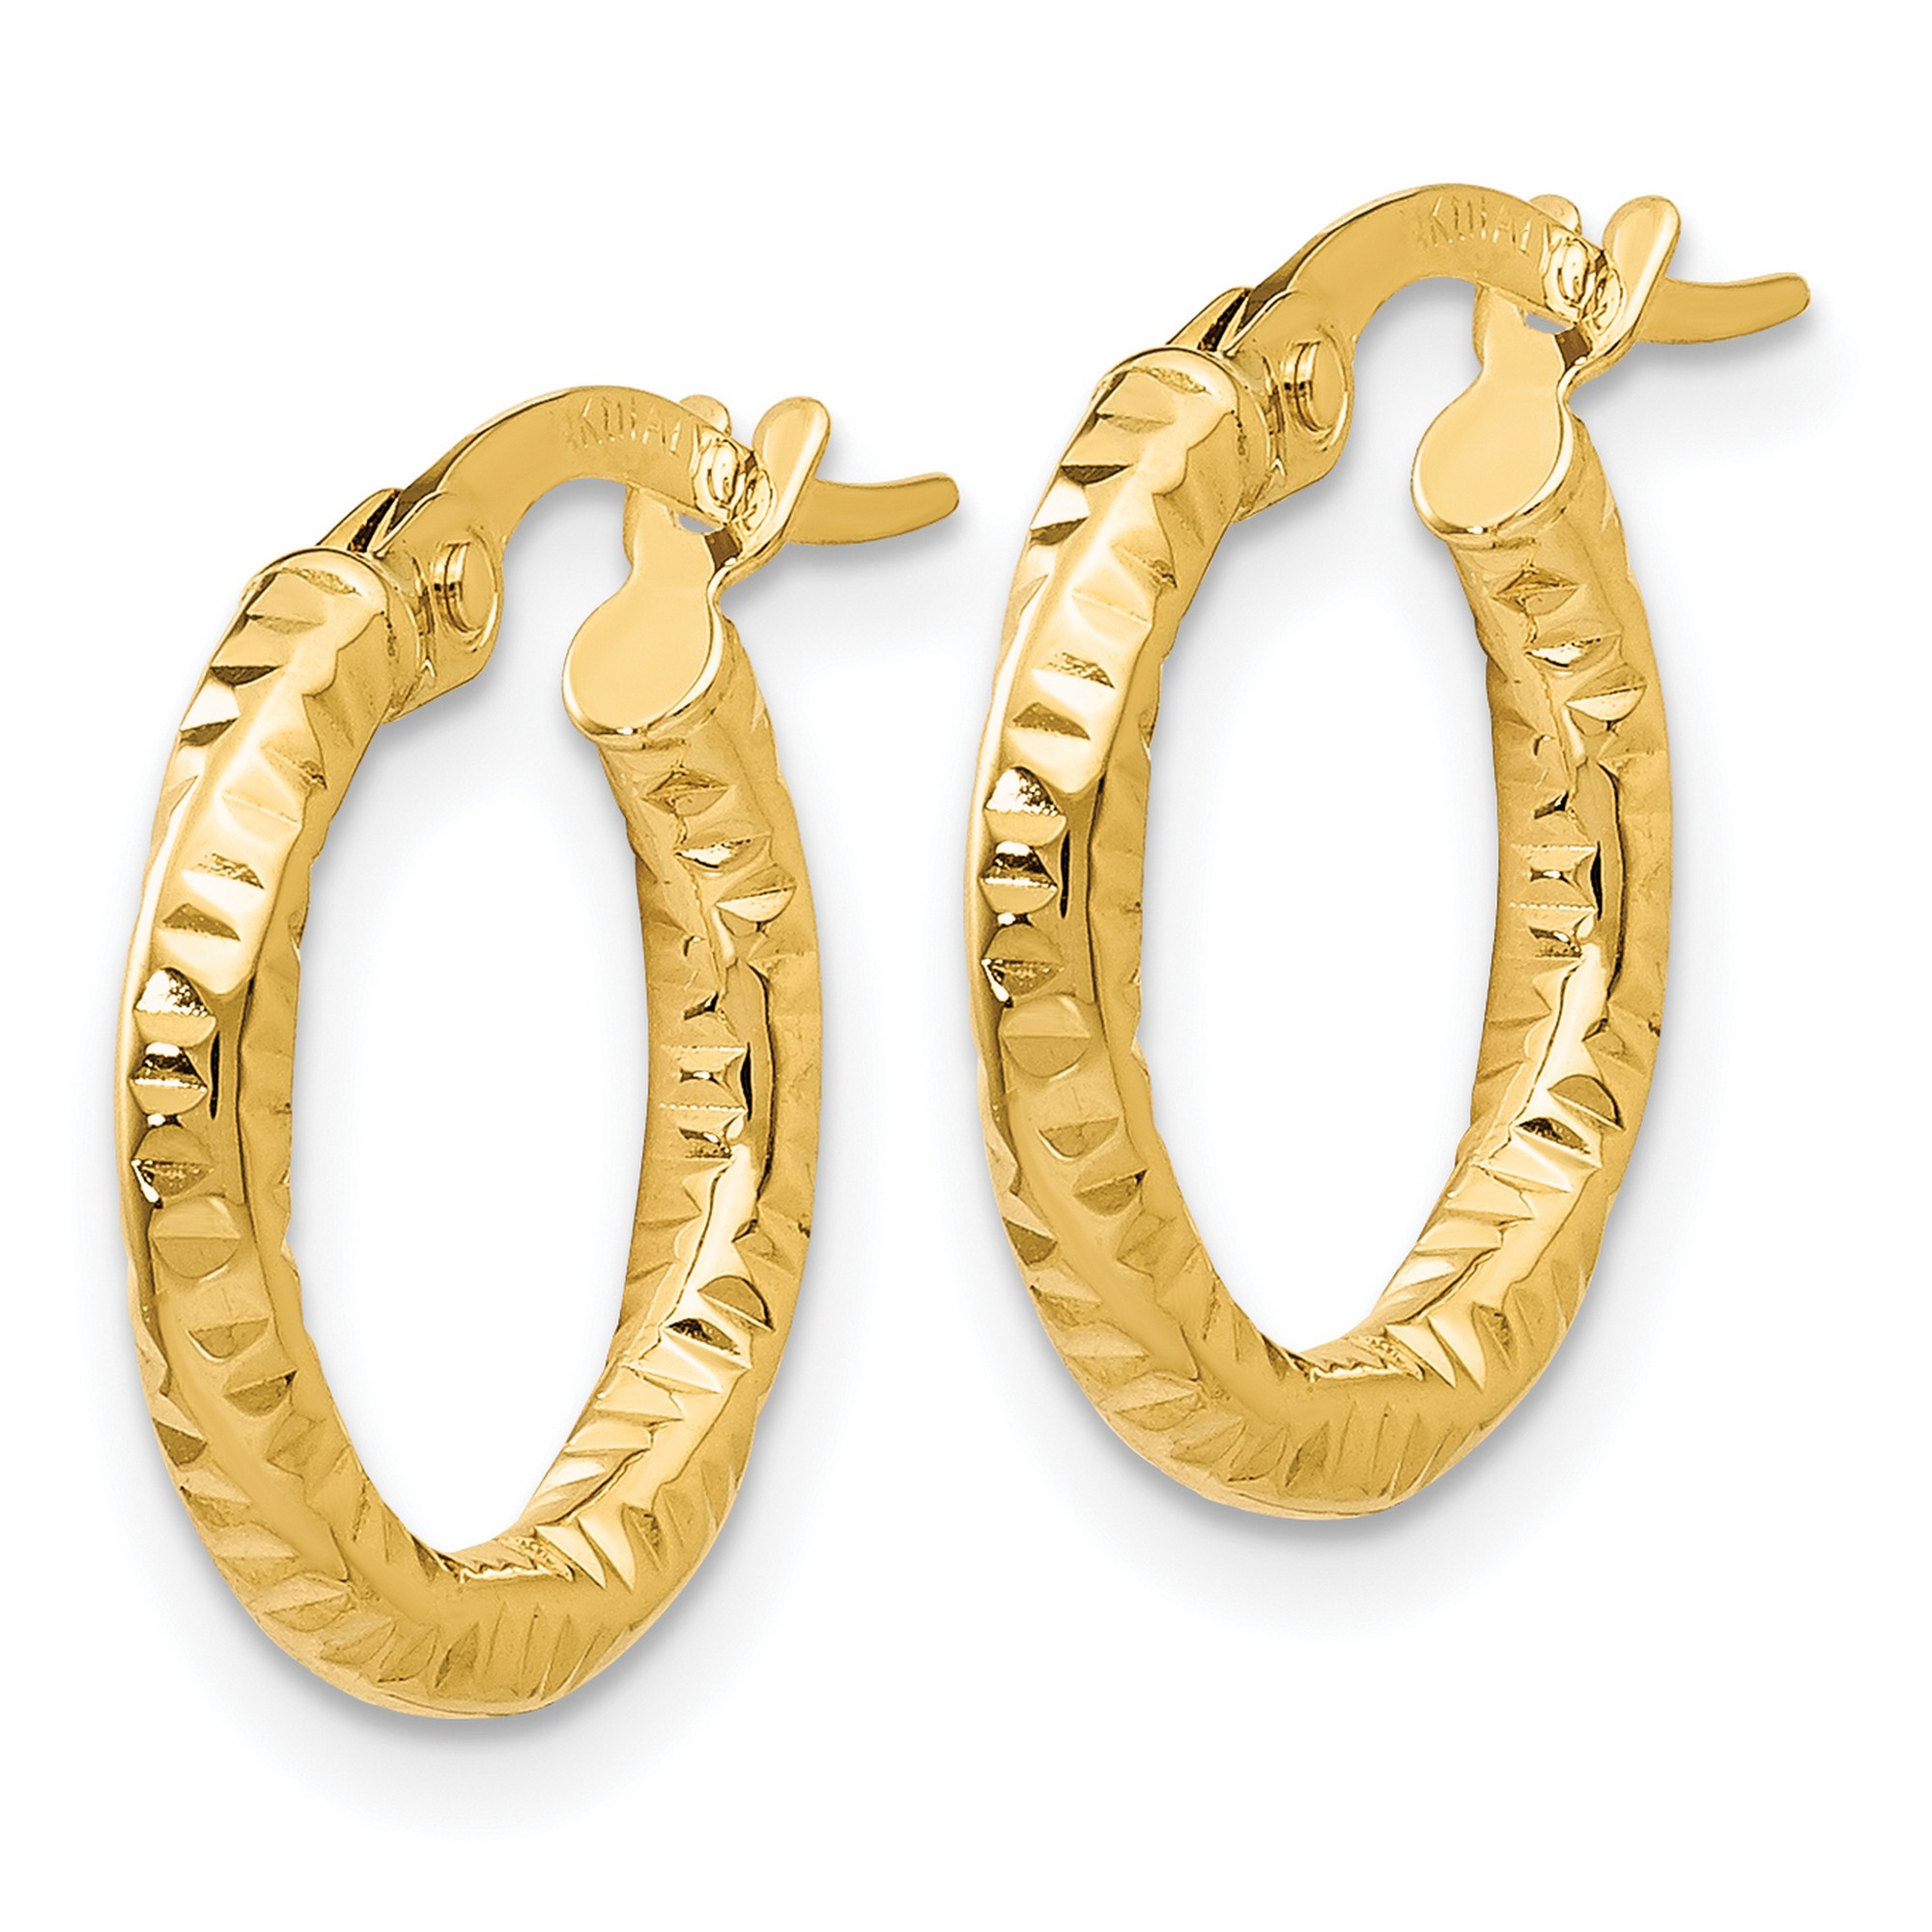 15 to 36mm 2 mm Polished Textured Hoop Earrings in Genuine 14k Yellow Gold 